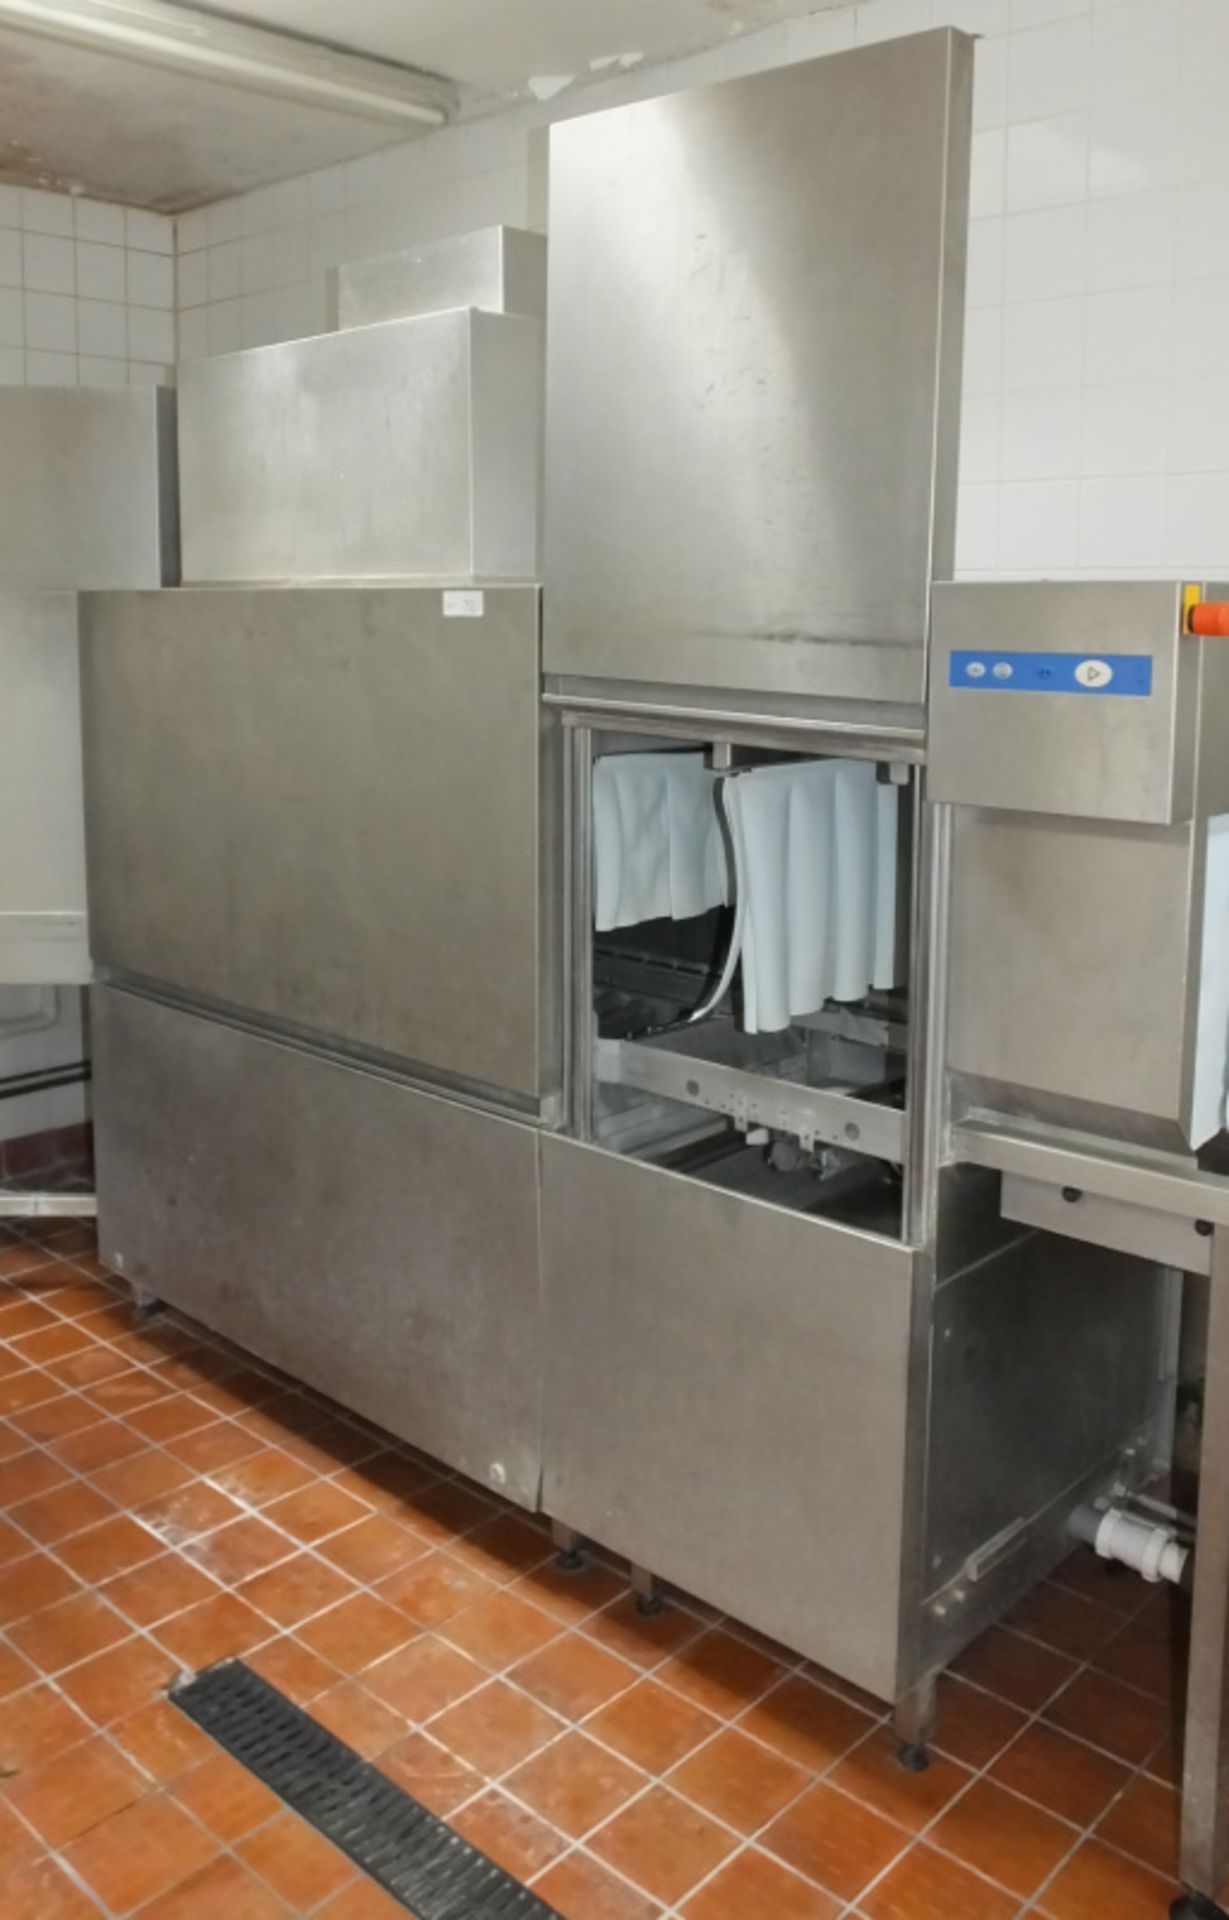 Hobart CHP18 Pass Through Dishwasher Unit with Conveyor System - Details in description - Image 2 of 13